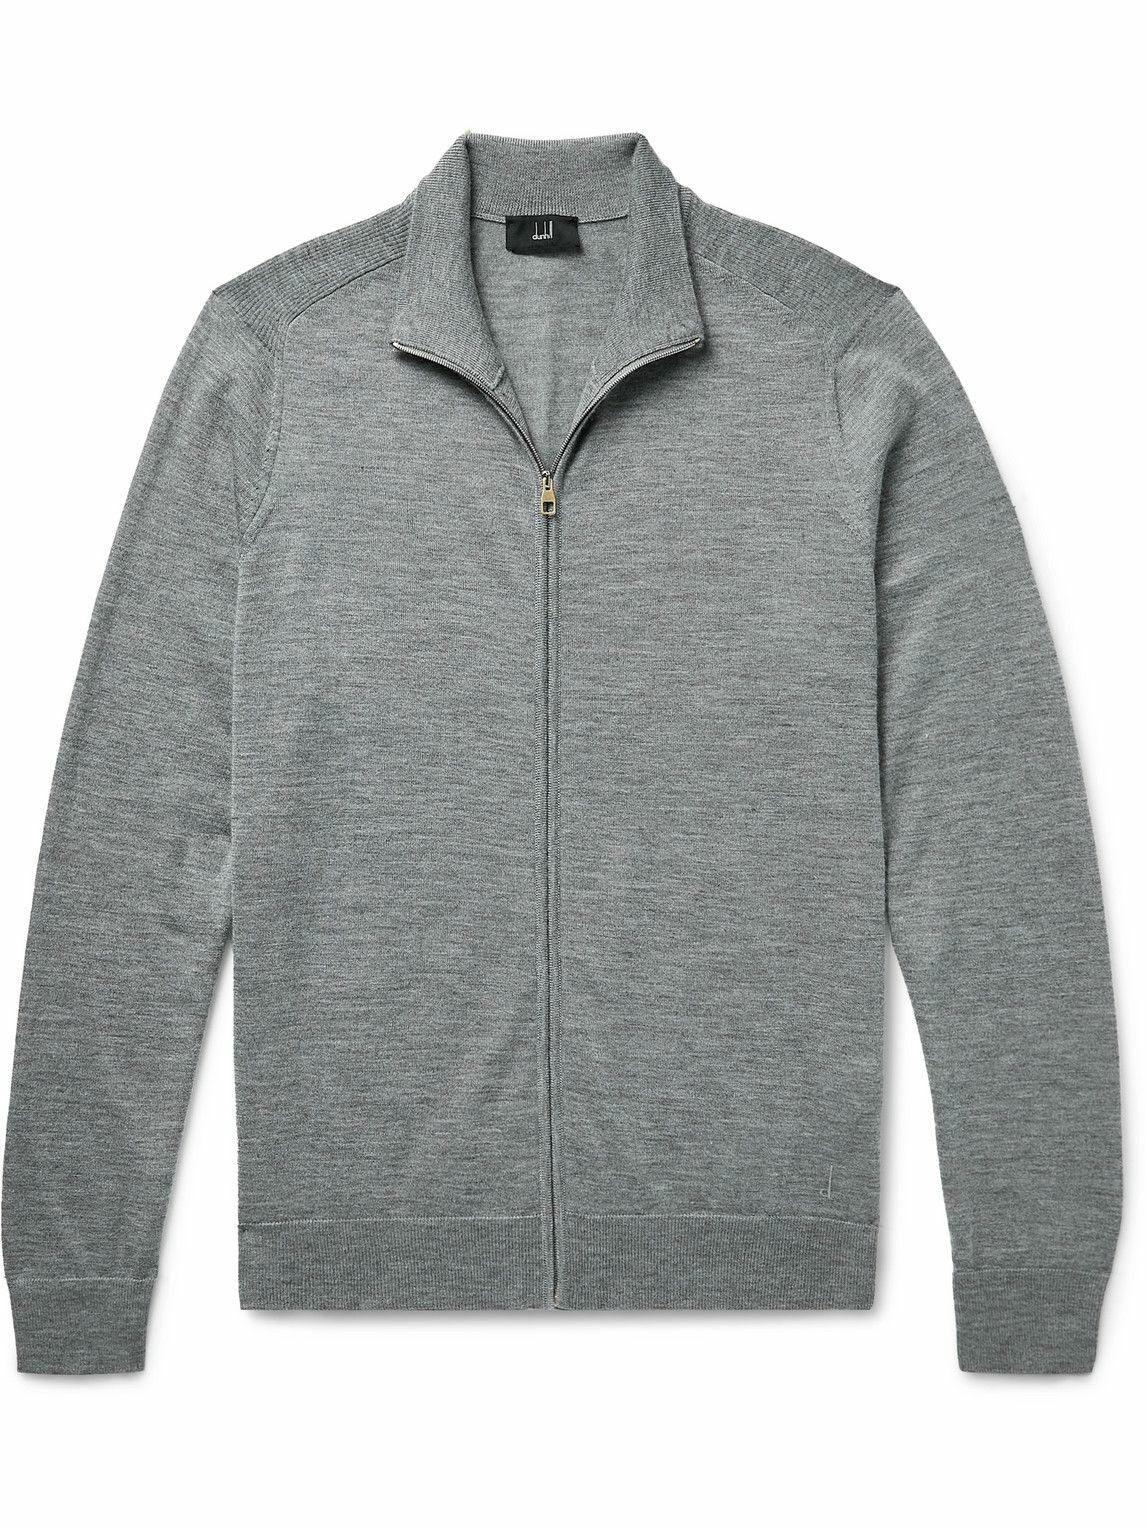 Dunhill - Cashmere Zip-Up Cardigan - Gray Dunhill